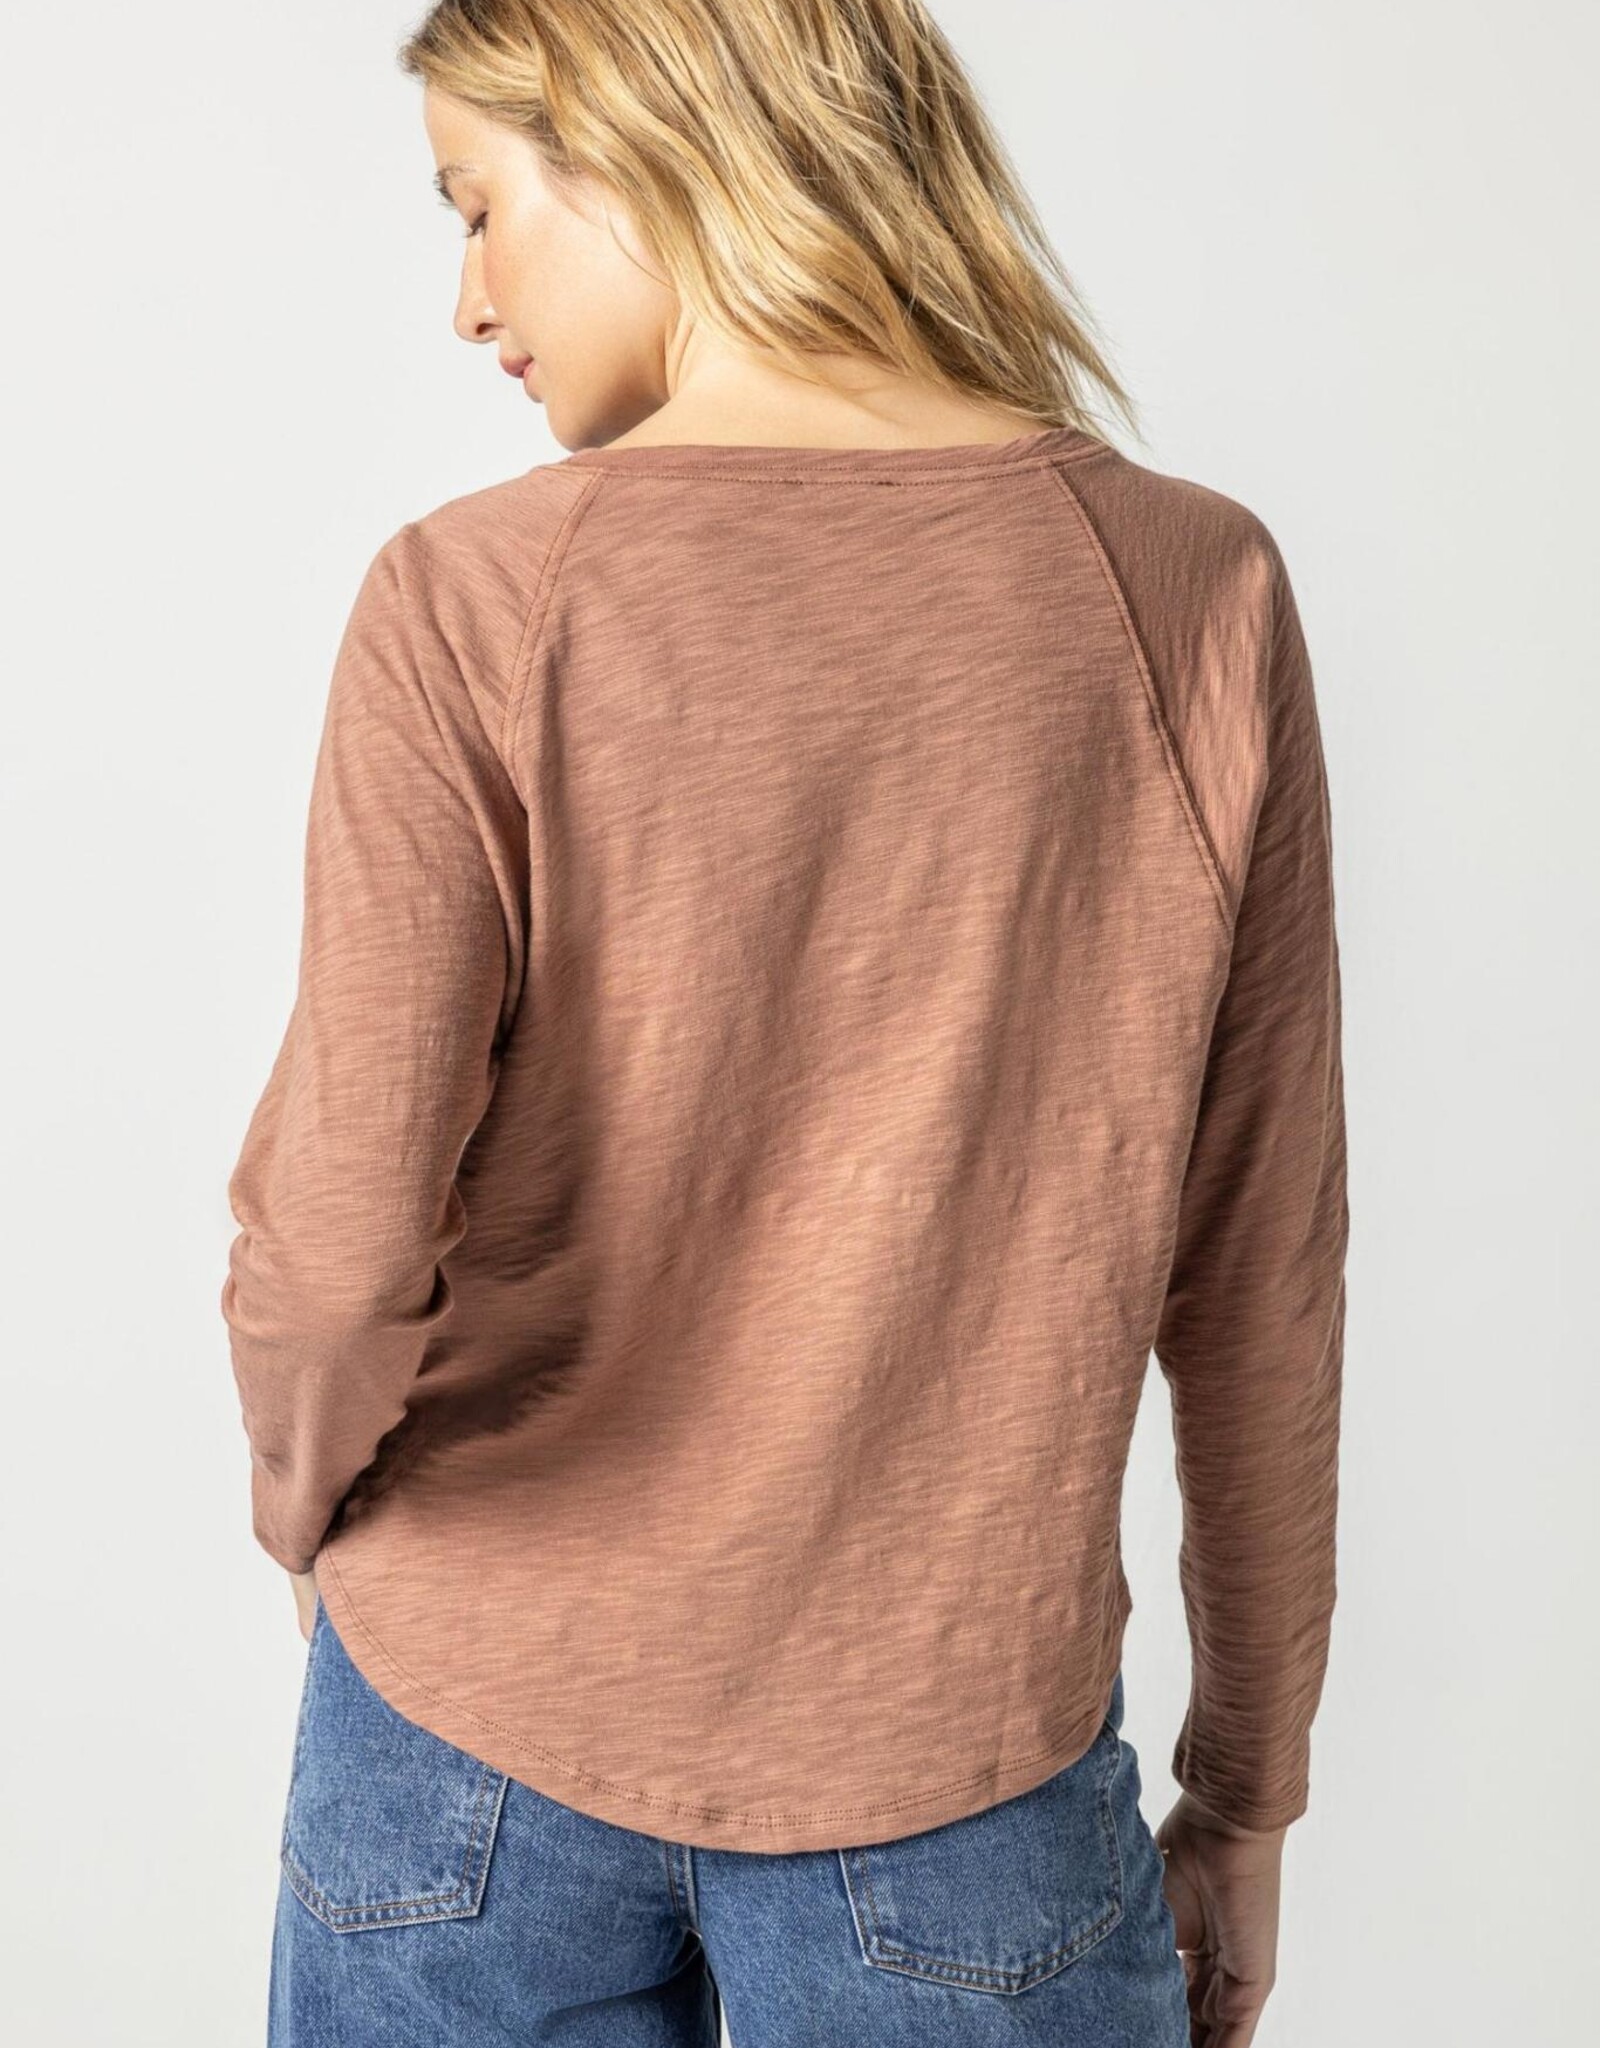 Lilla P Long Sleeve Gusset Boatneck Top